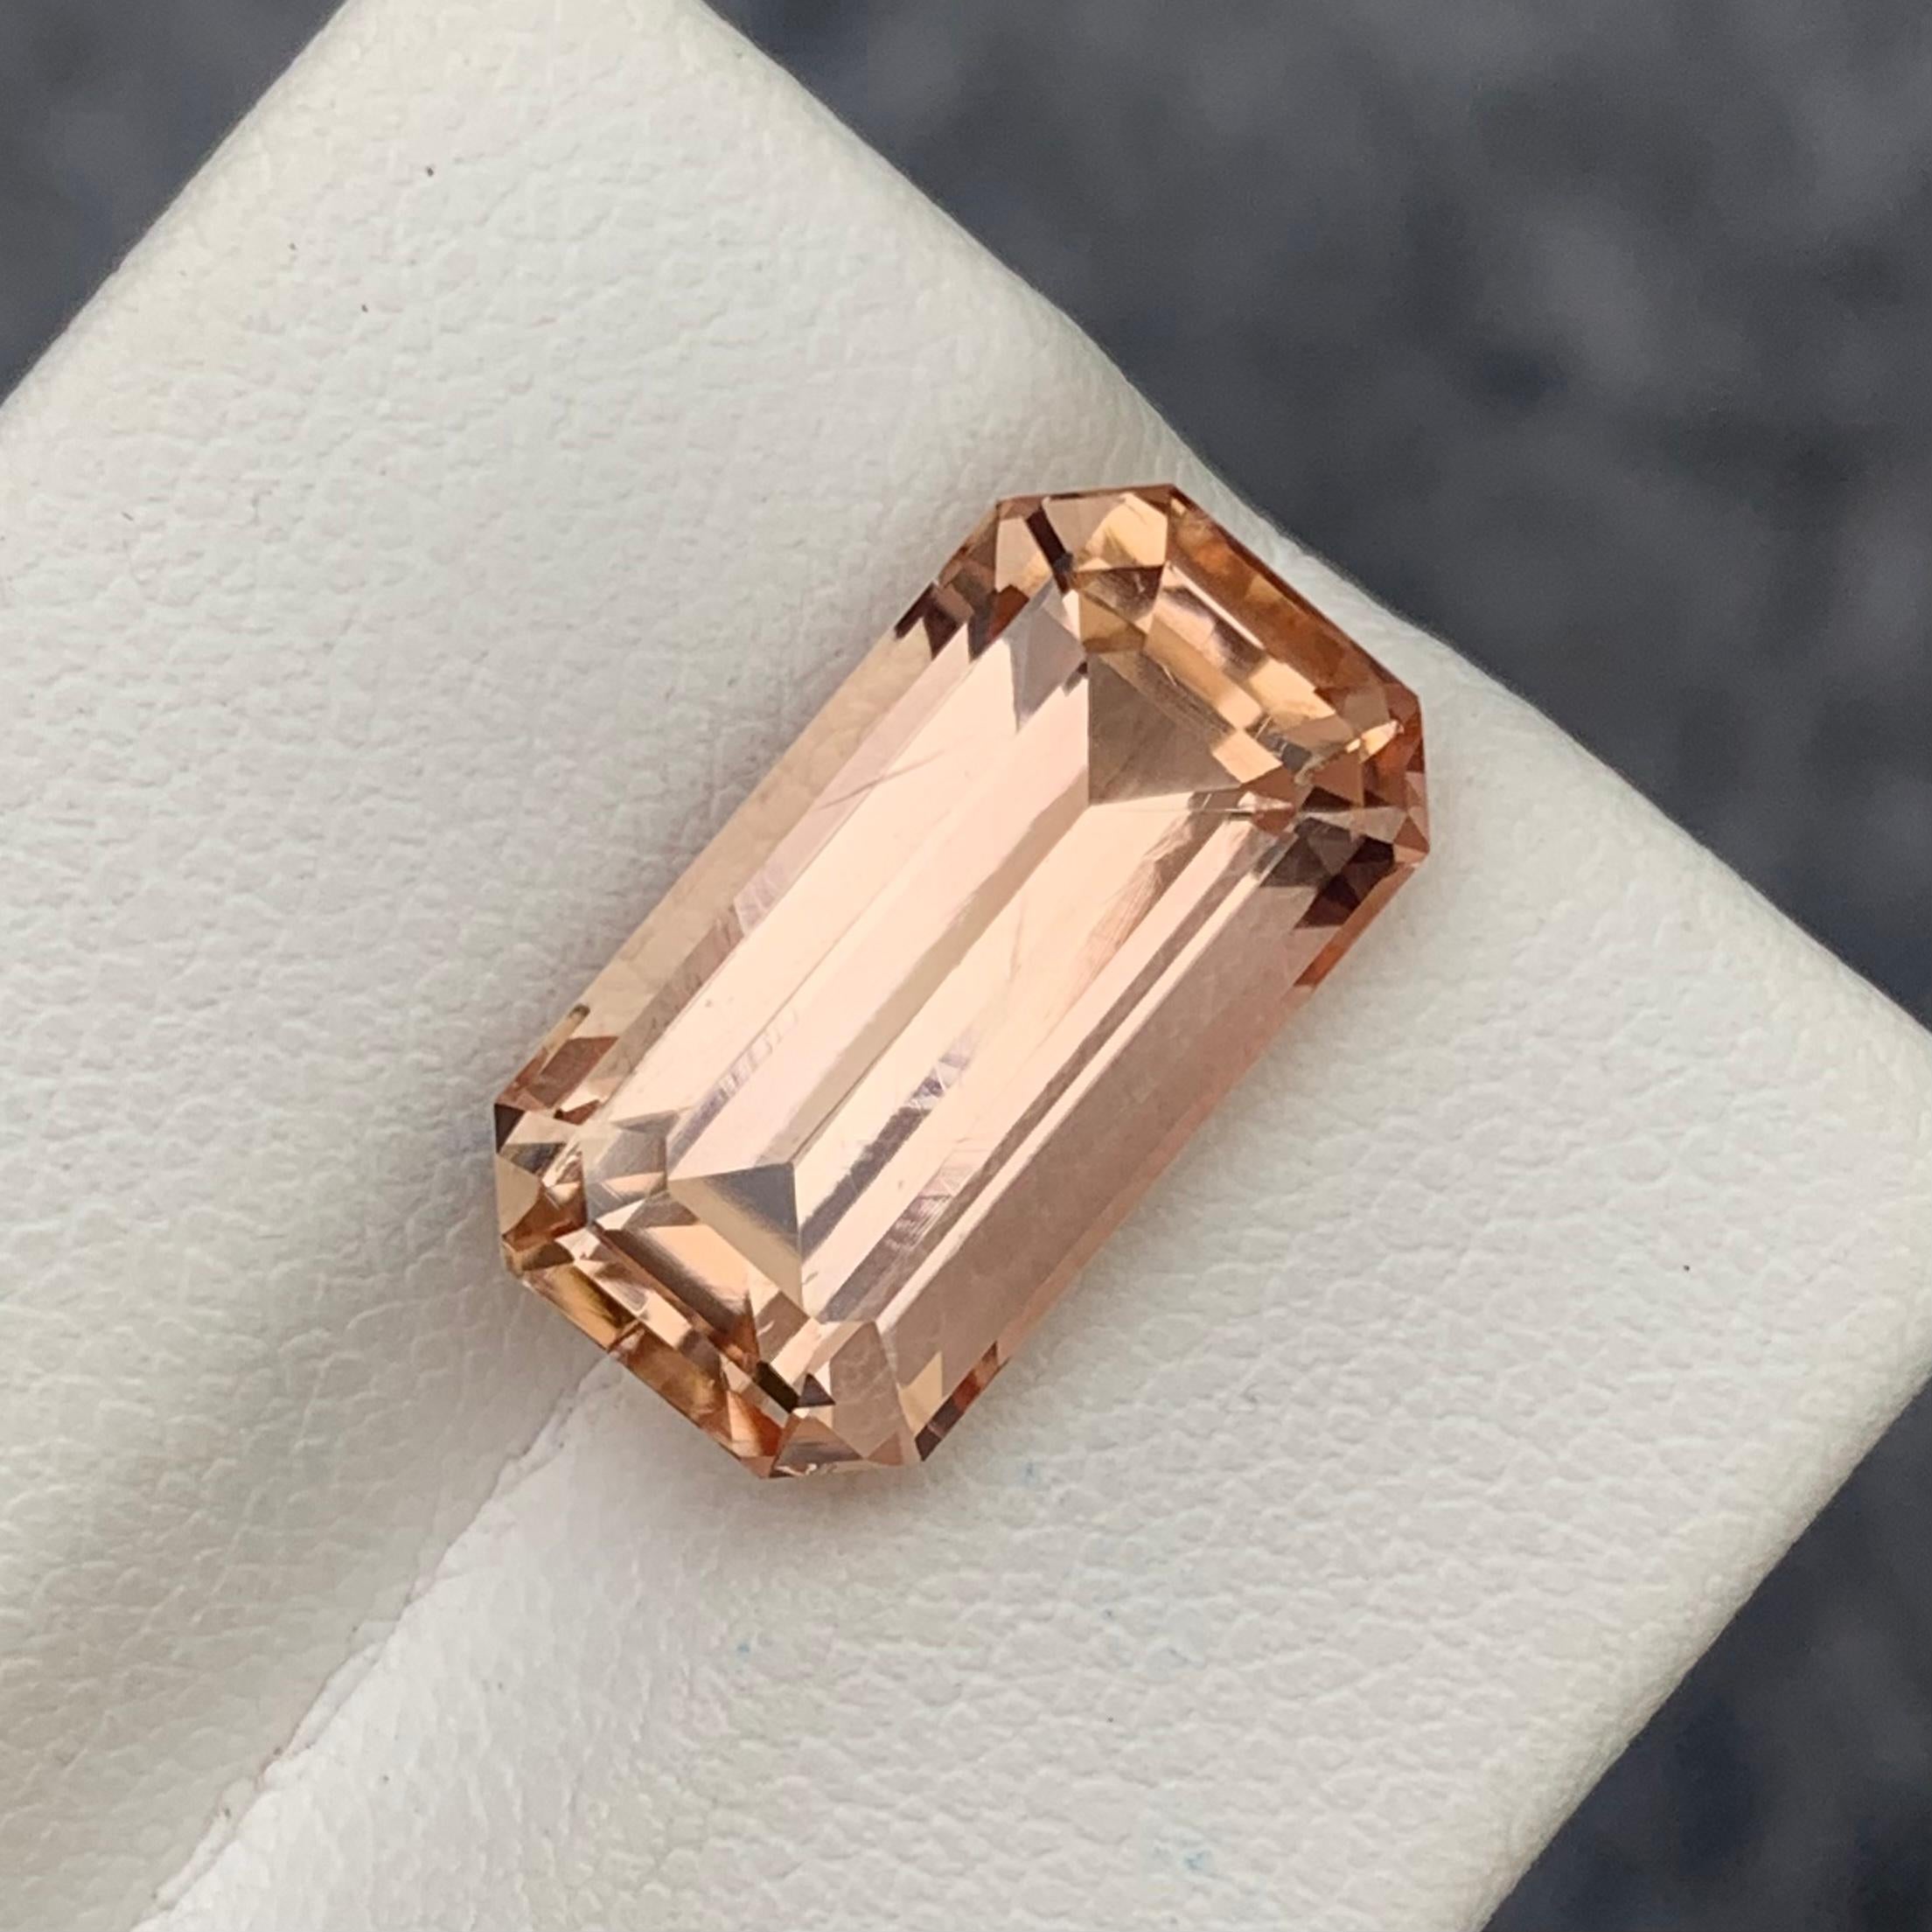 Faceted Imperial Topaz 
Weight: 10.40 Carats
Dimension: 15.9x8.6x7.8 Mm
Origin: Pakistan 
Shape: Emerald 
Color; Peach Imperial 
Treatment: Non
Certificate: On Demand 
Imperial Topaz encourages healthy boundaries and helps us be attracted to the